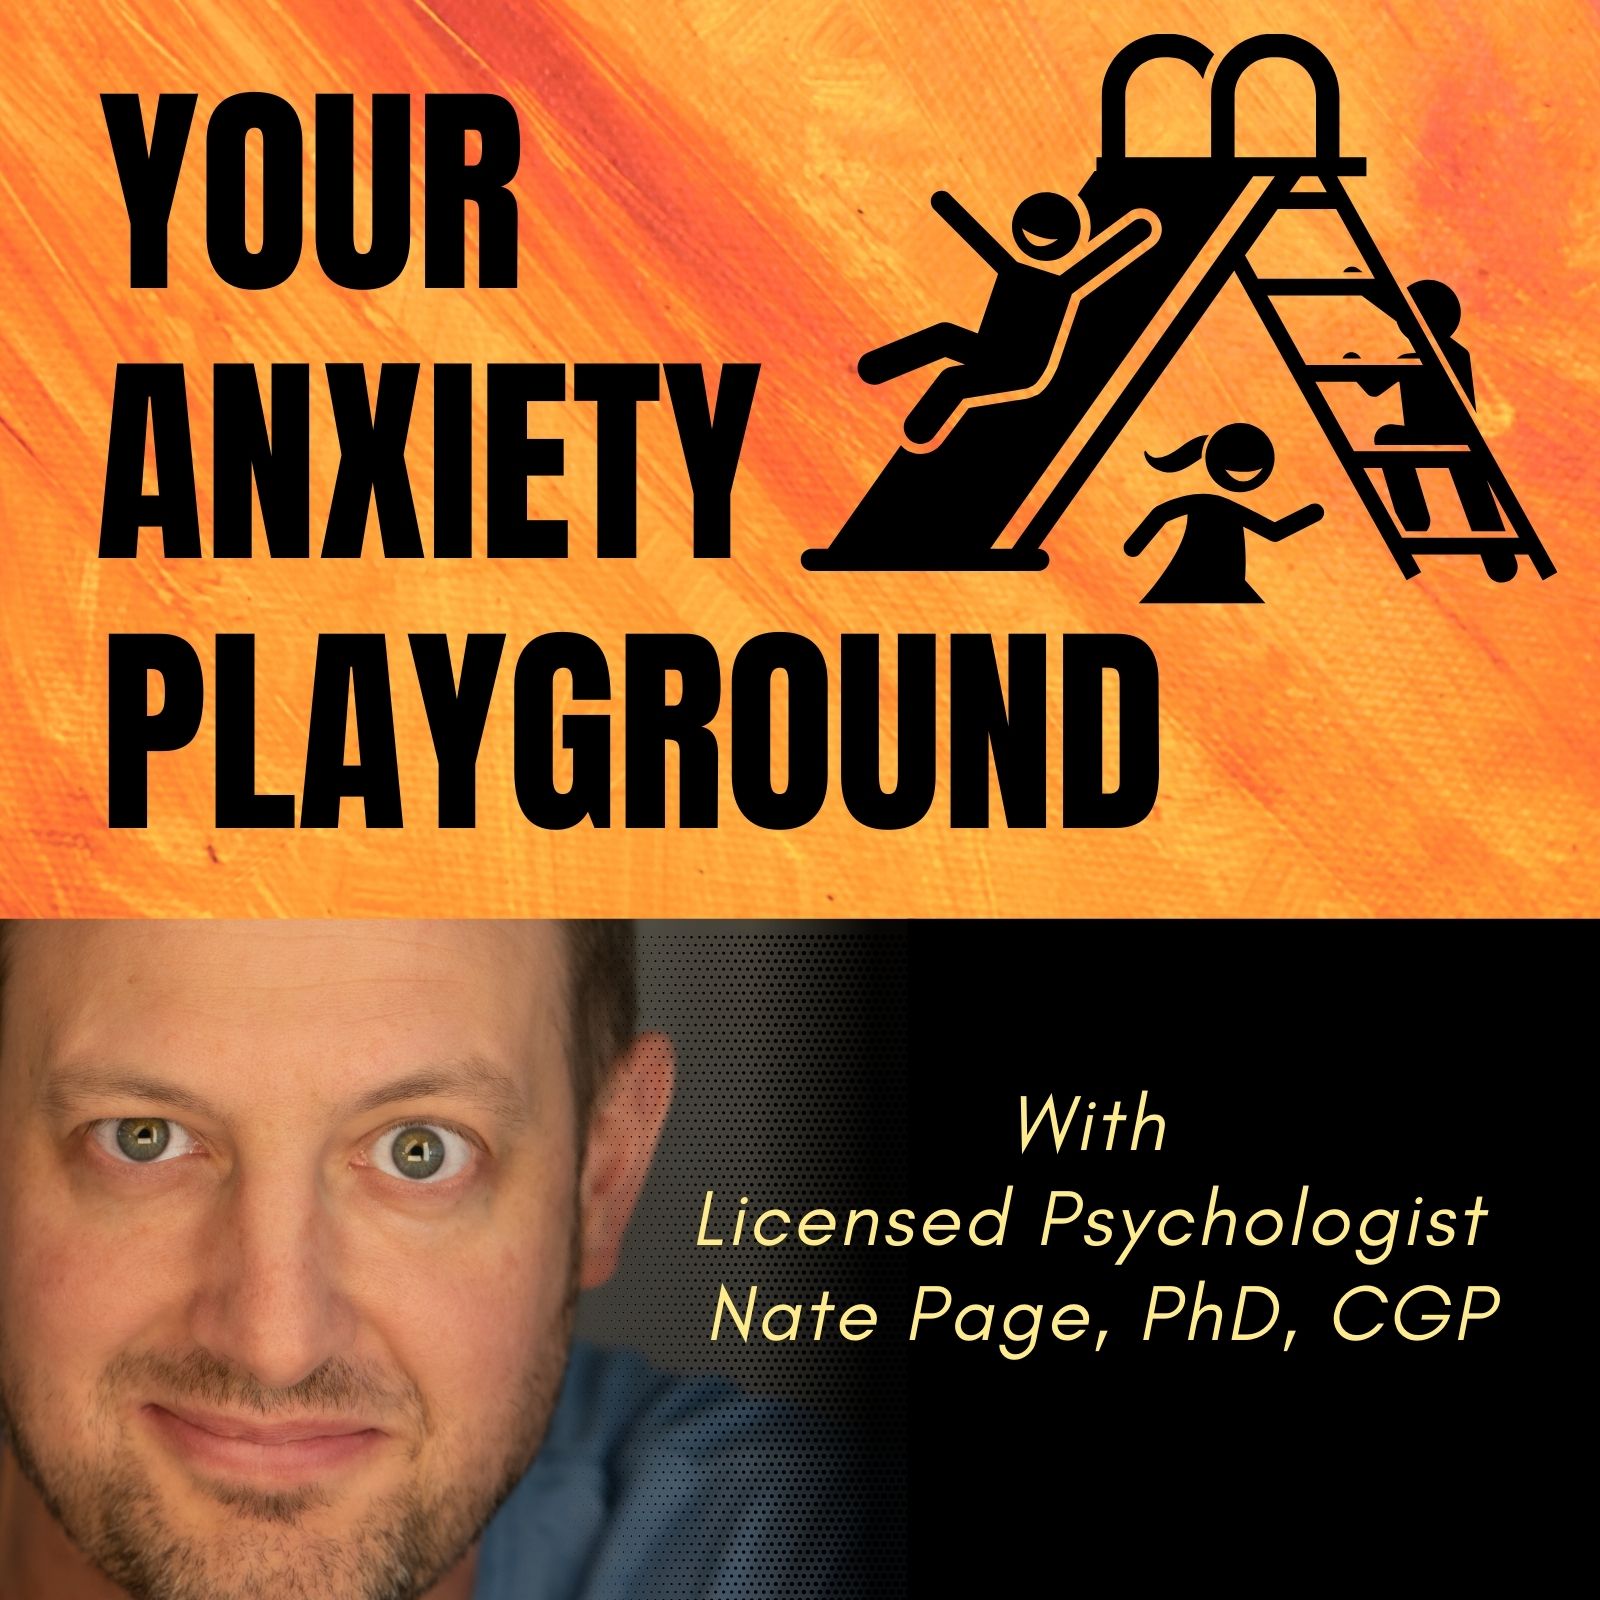 Artwork for Your Anxiety Playground